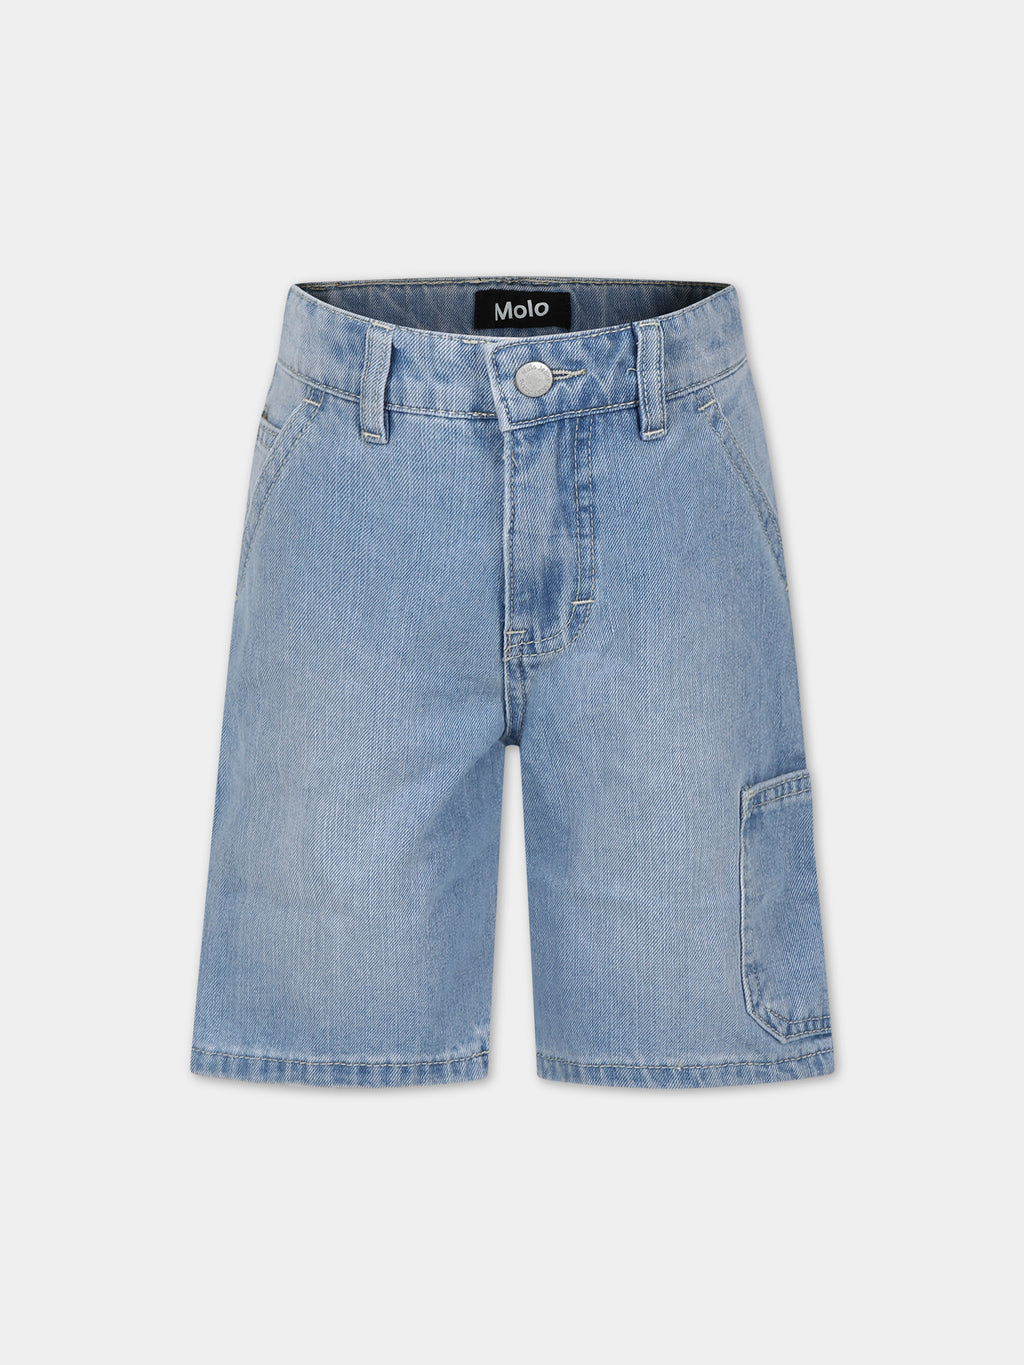 Casual denim shorts for kids